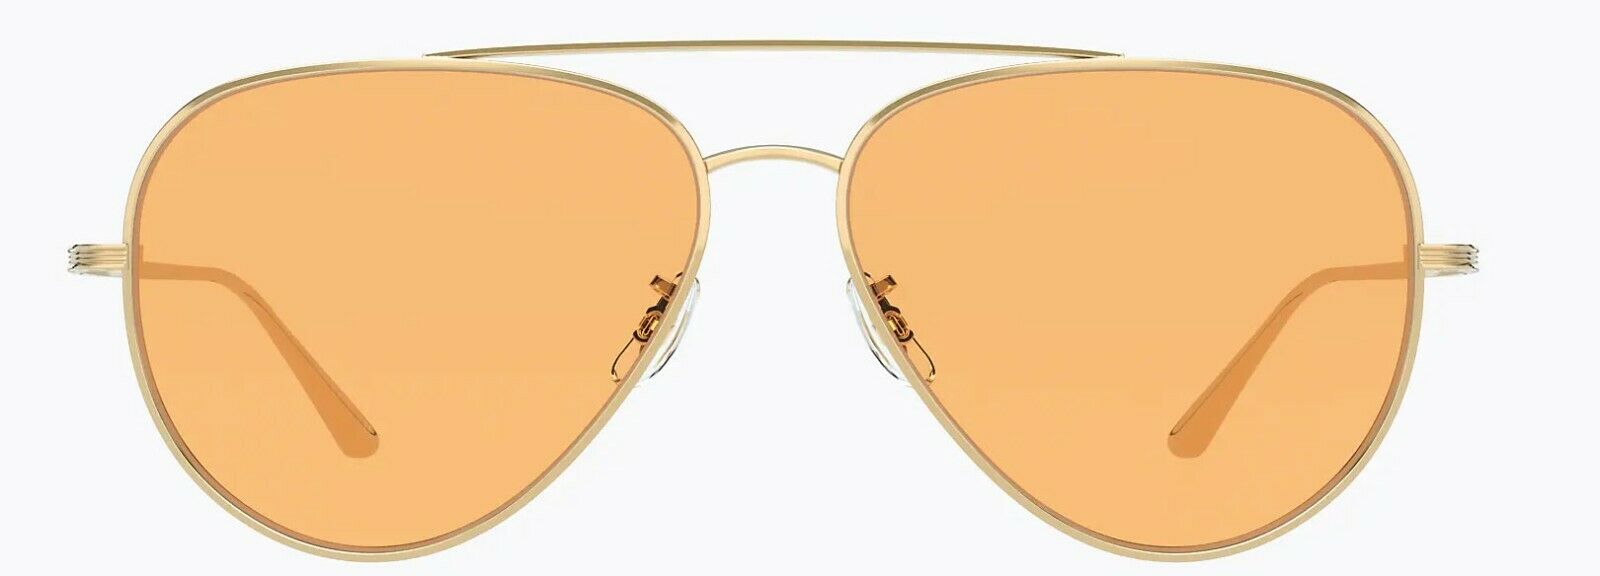 Oliver Peoples Sunglasses 1277ST 5292V9 The Row Casse Gold /Tangerine Photo 58mm-827934450943-classypw.com-1